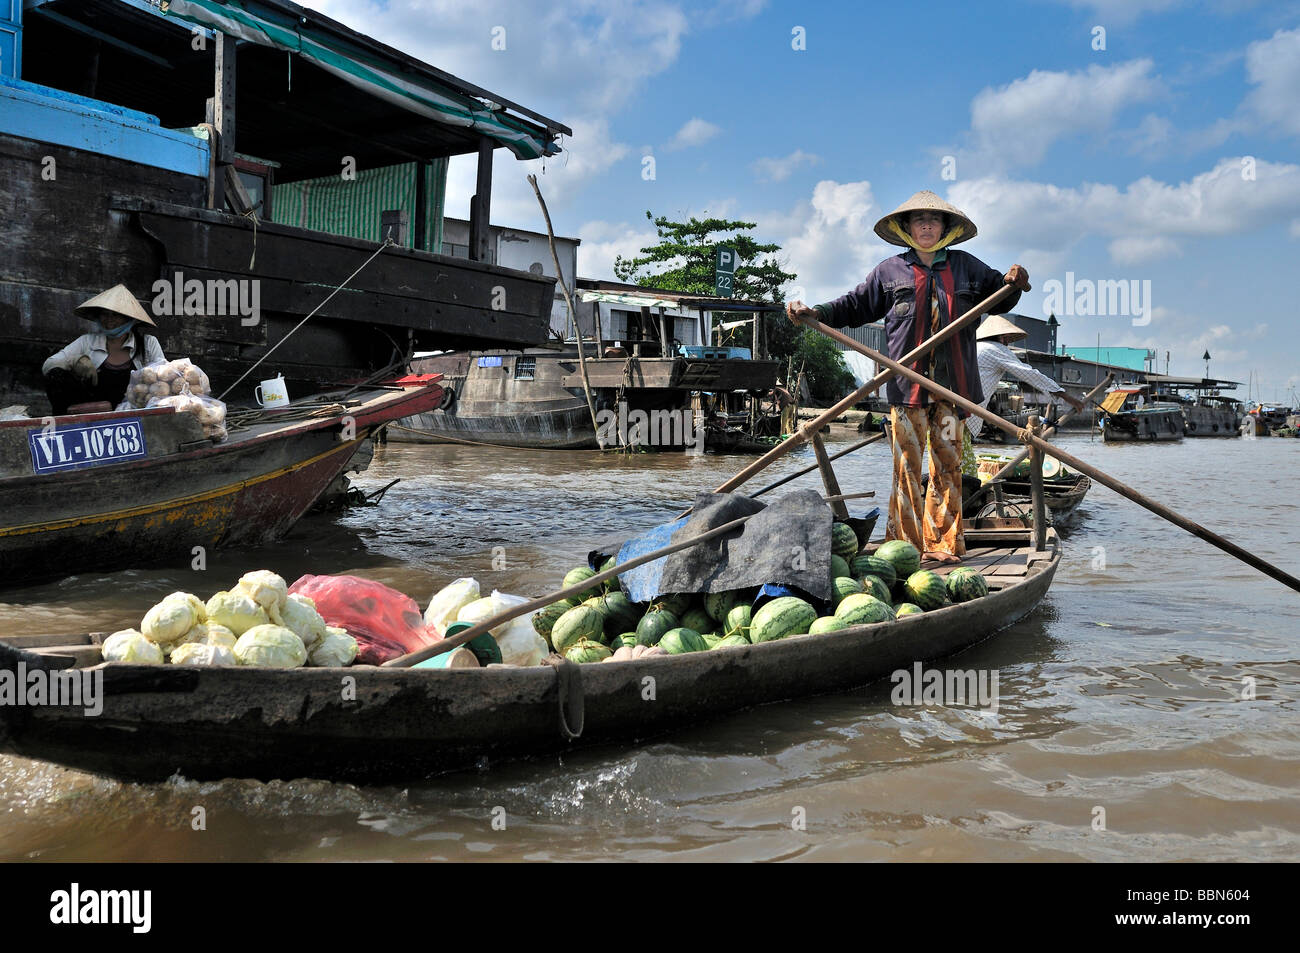 Woman with traditional hat, cone-shaped hat made of palm leaves, standing and rowing a wooden boat on the Mekong, load of fruit Stock Photo